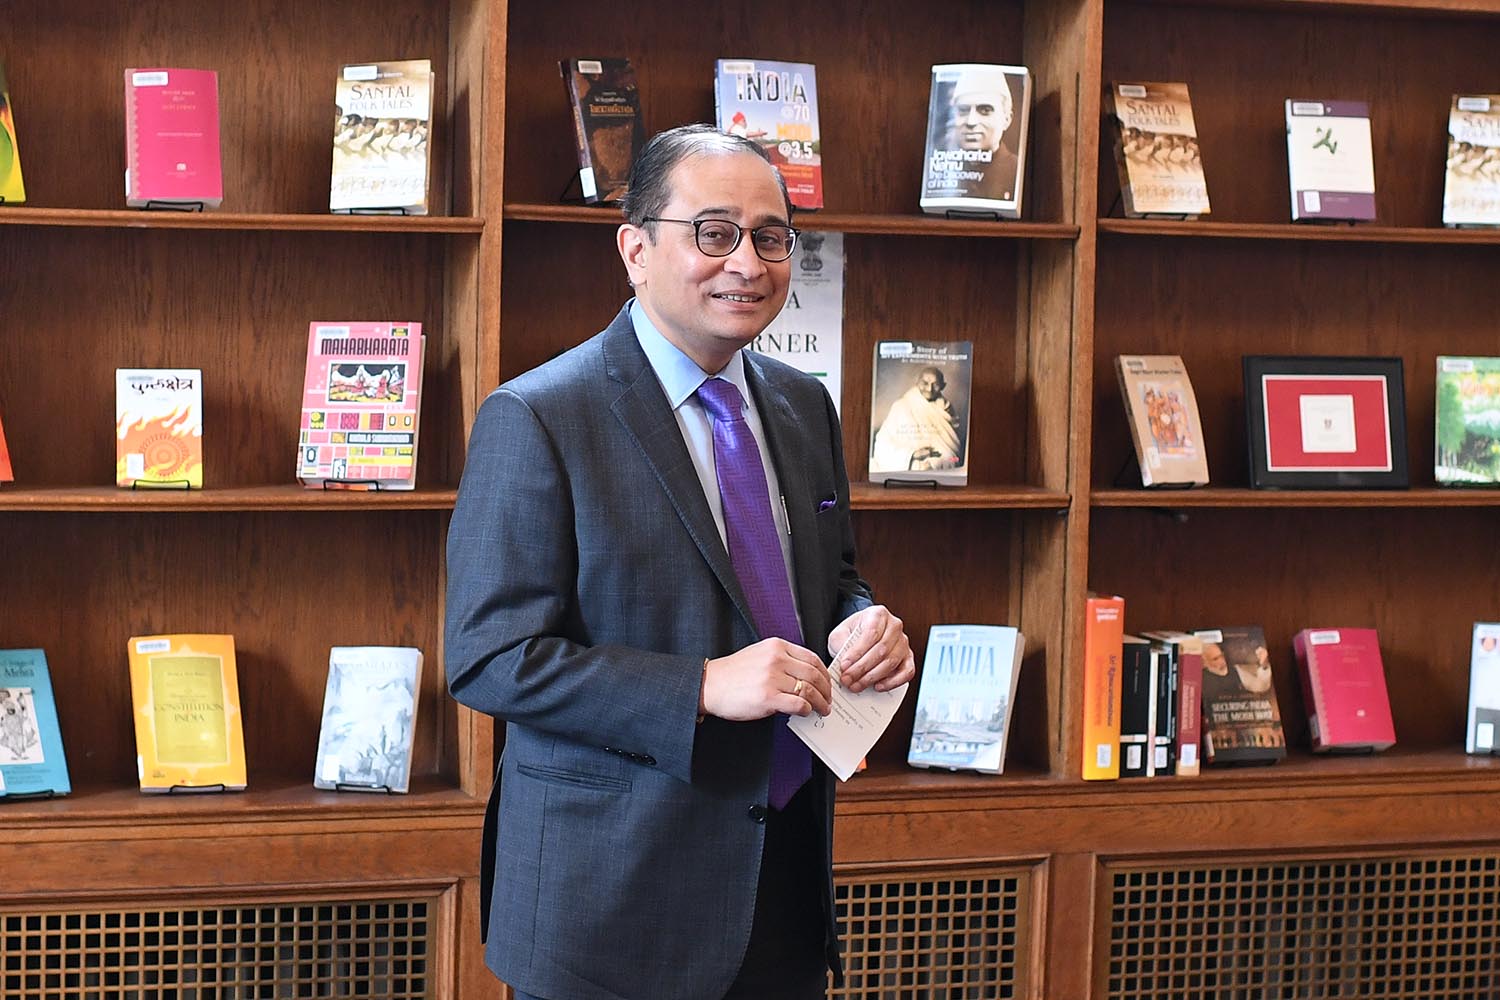 Consul Chakravorty, a member of the Indian Foreign Service (IFS) since 1996, became the Consul General of India in New York in August 2017. He was formerly the Ambassador of India to Peru and Bolivia. 